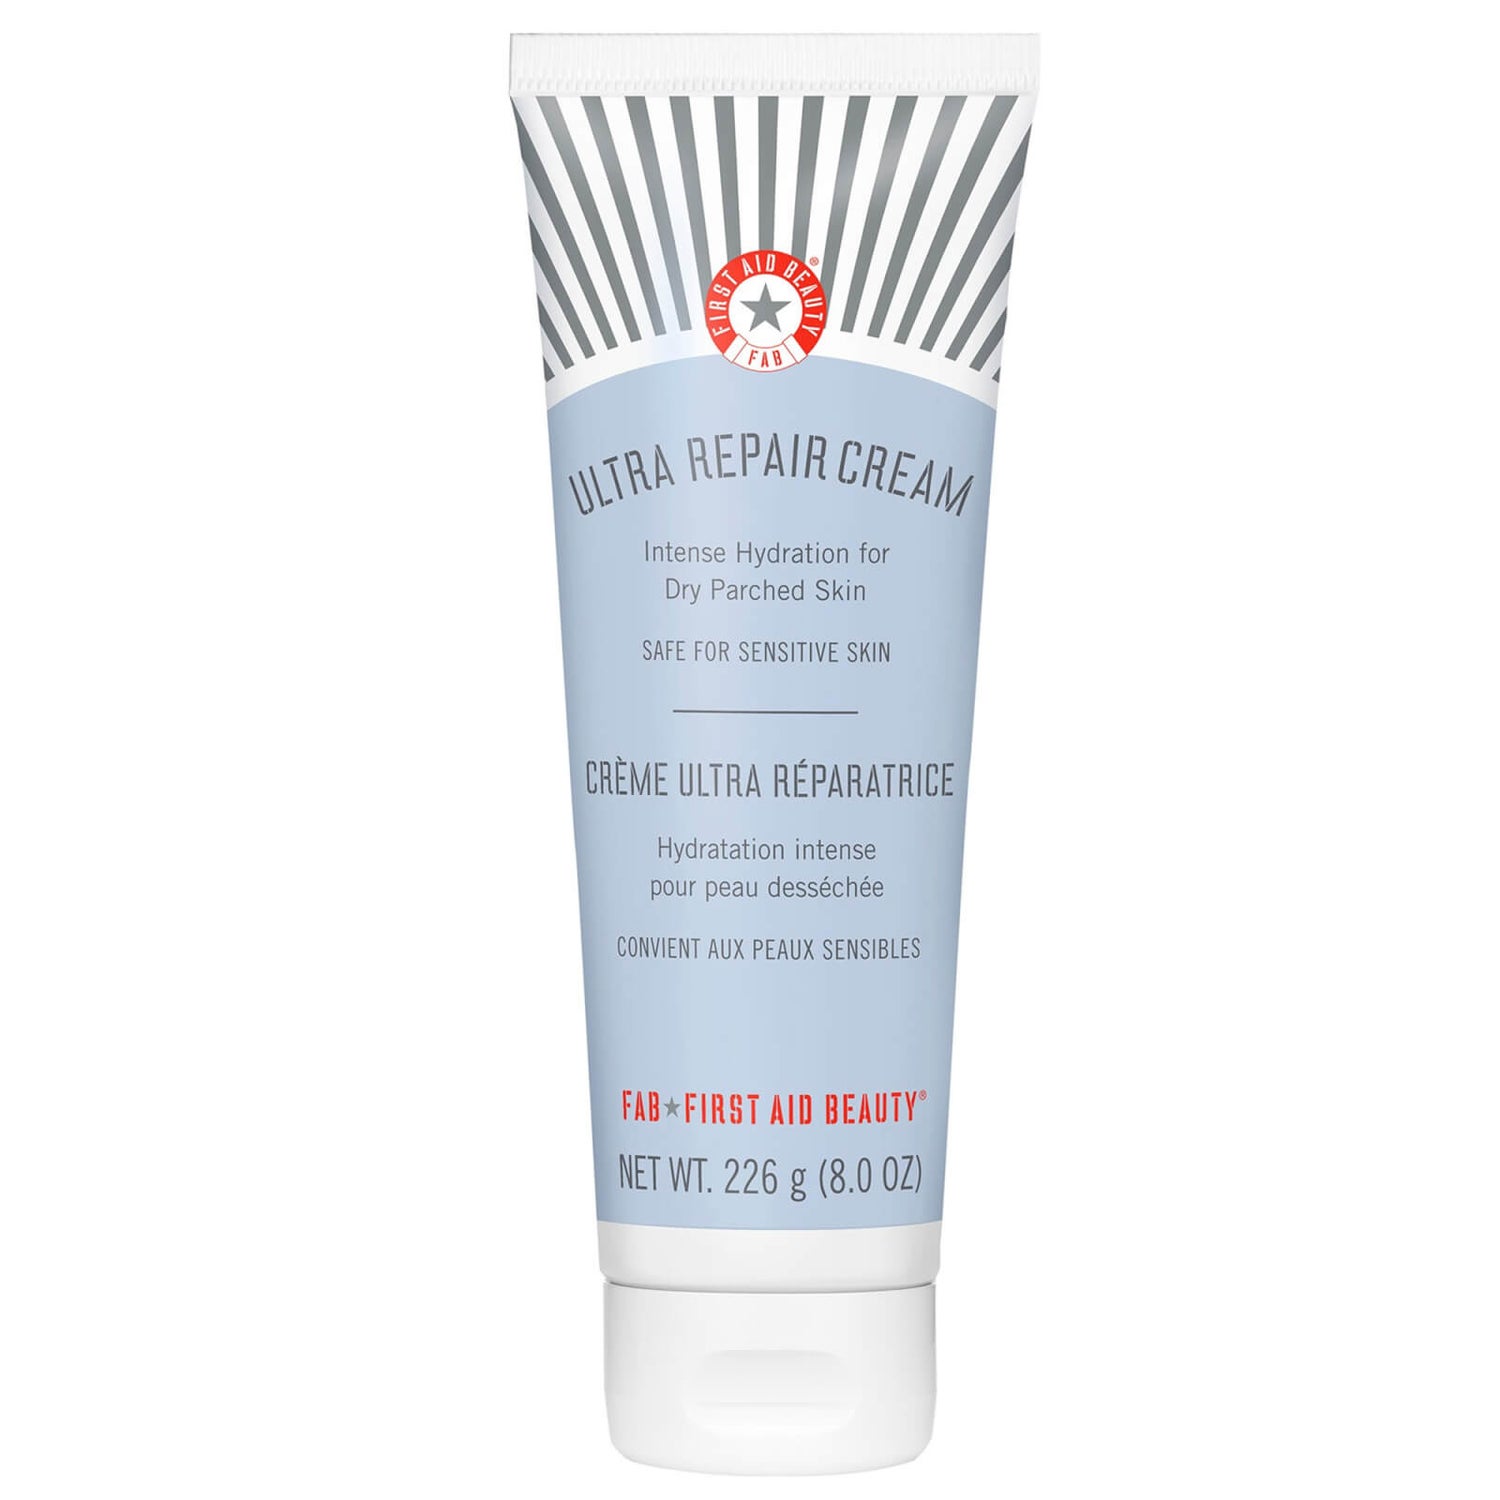 First Aid Beauty - Skin care